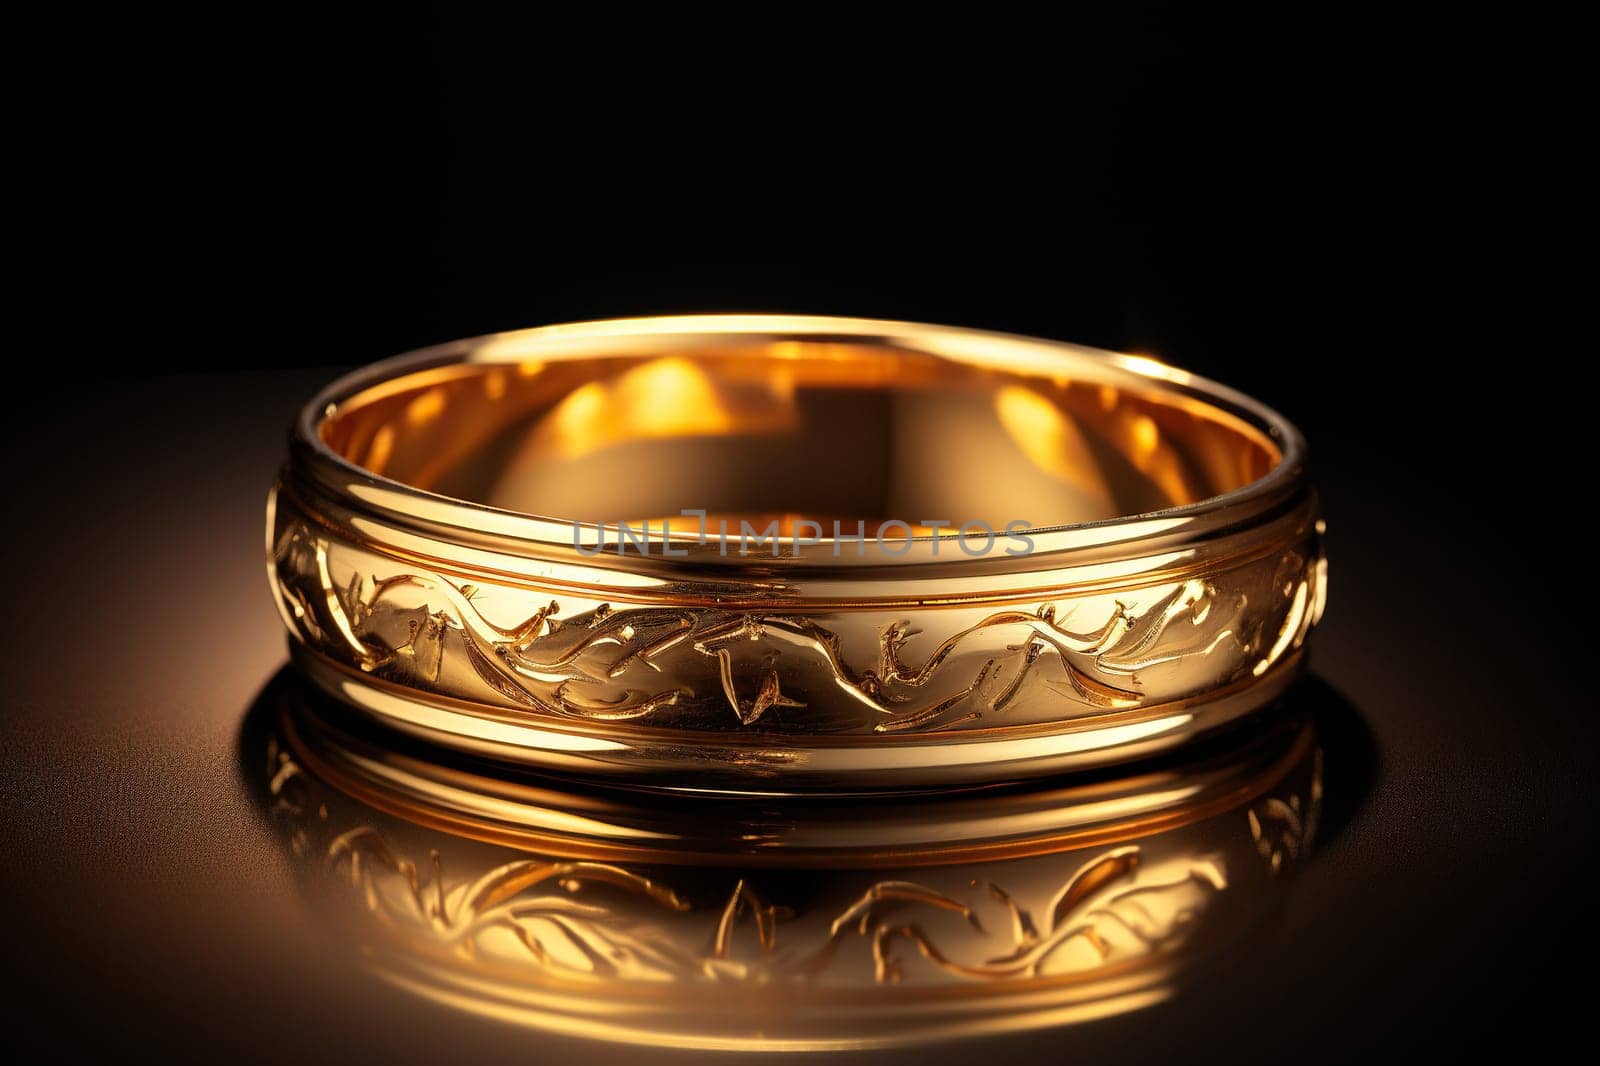 Gold ring with precious stones on a dark background.